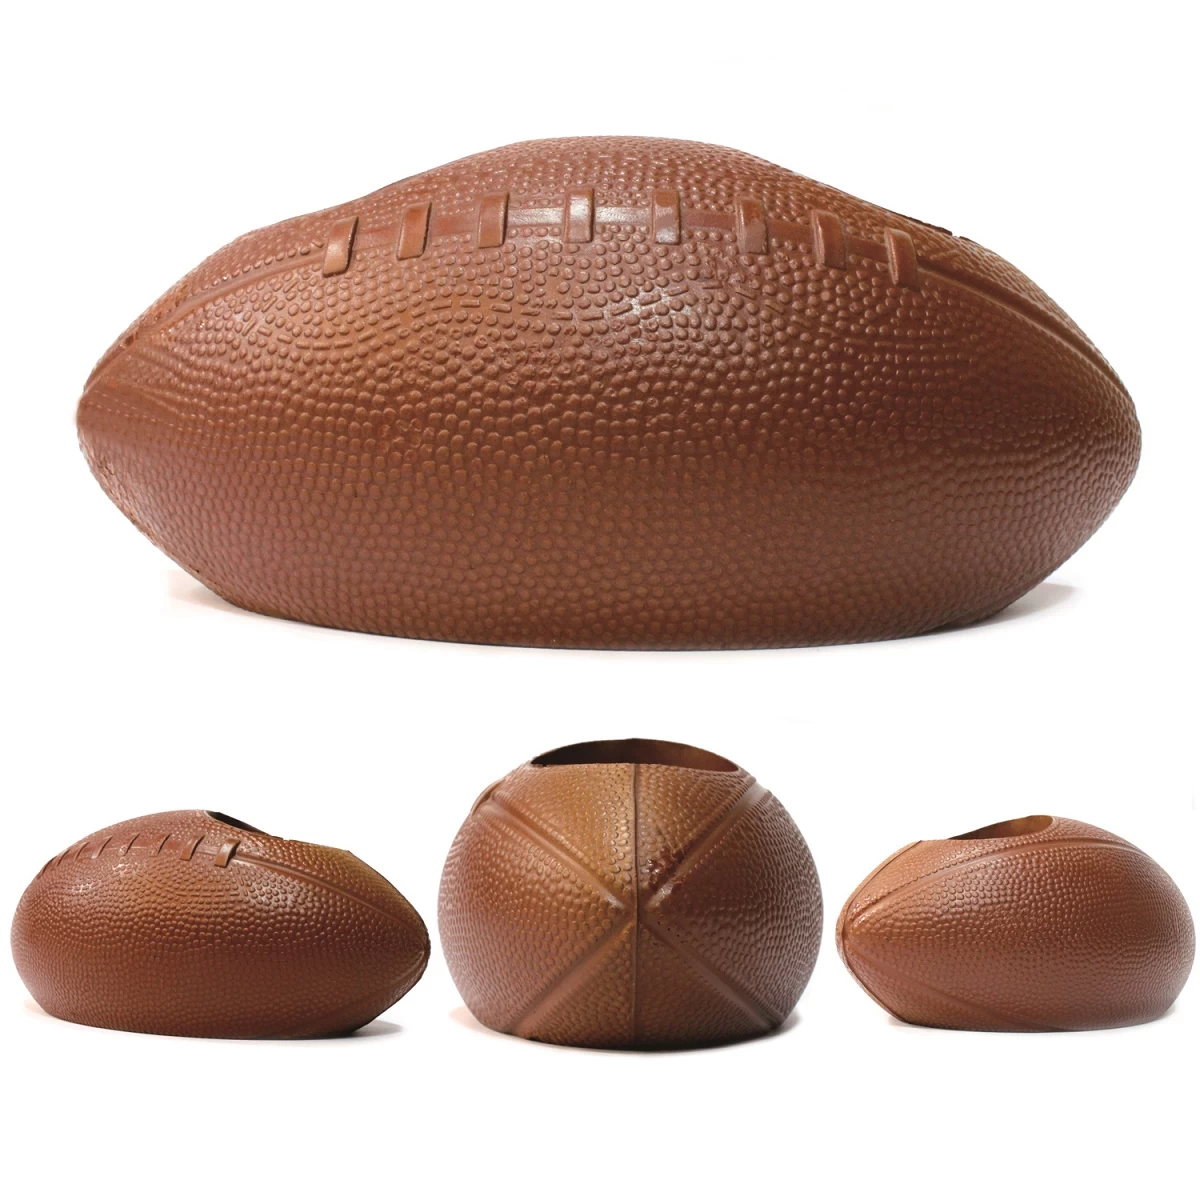 porcelana whole sale foam rugby ball,customizable children adult play toys,PU Football article,Rugby Football fabricante